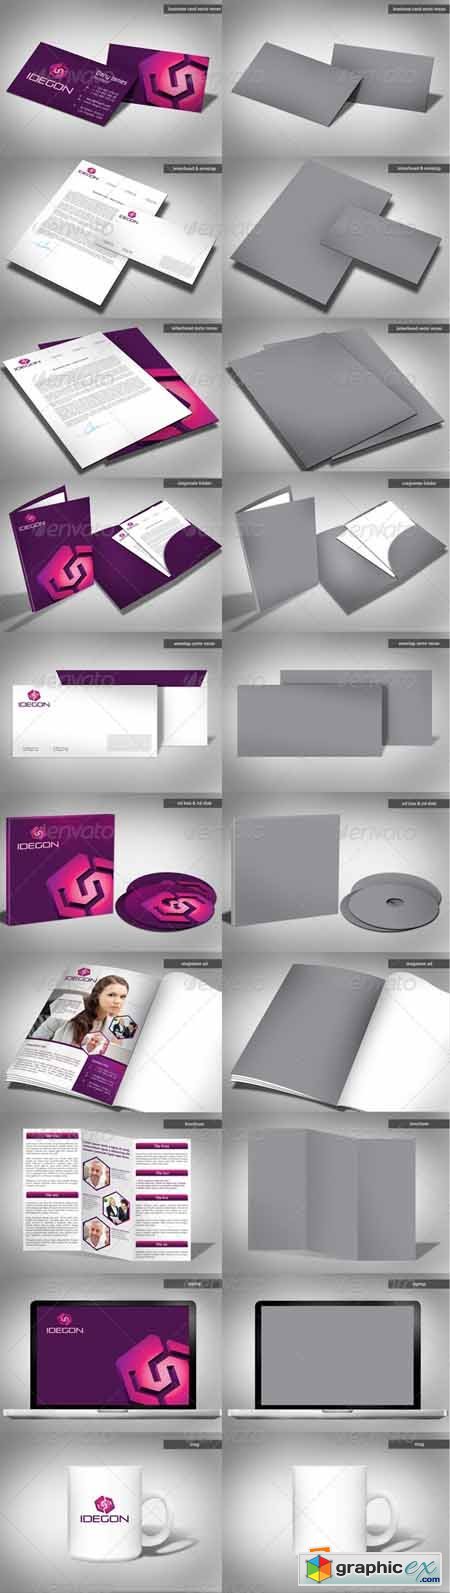 Corporate Identity Mockup Package 2878477